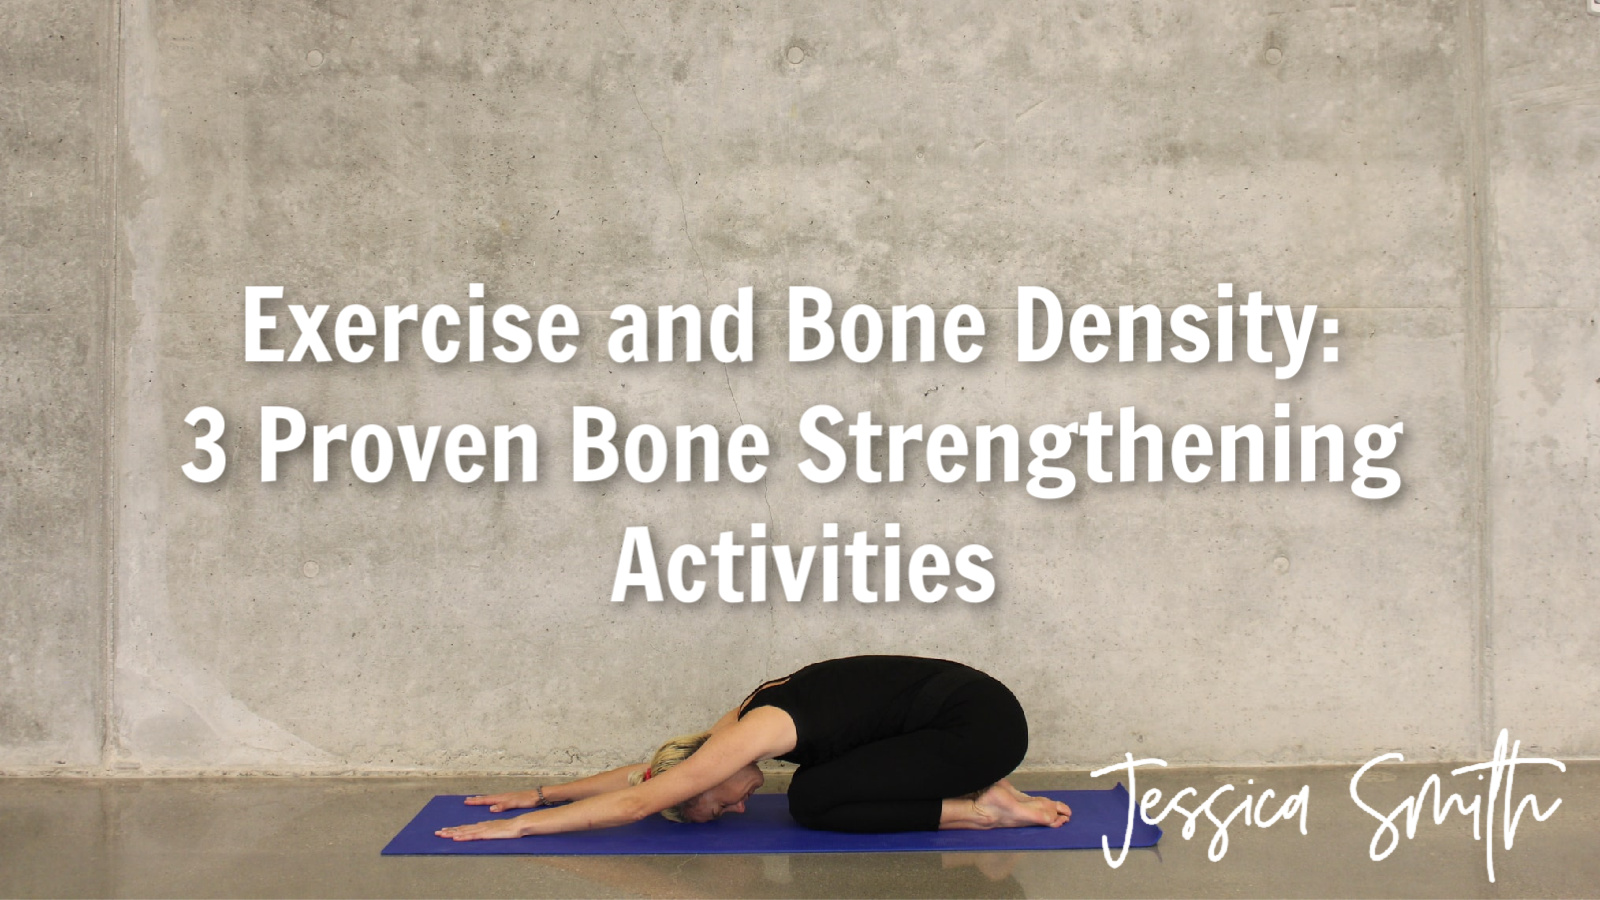 Regular exercise has many benefits, but did you know of the connection between exercise and bone health? Read on for more info & 3 proven bone density exercises by Jessica Smith